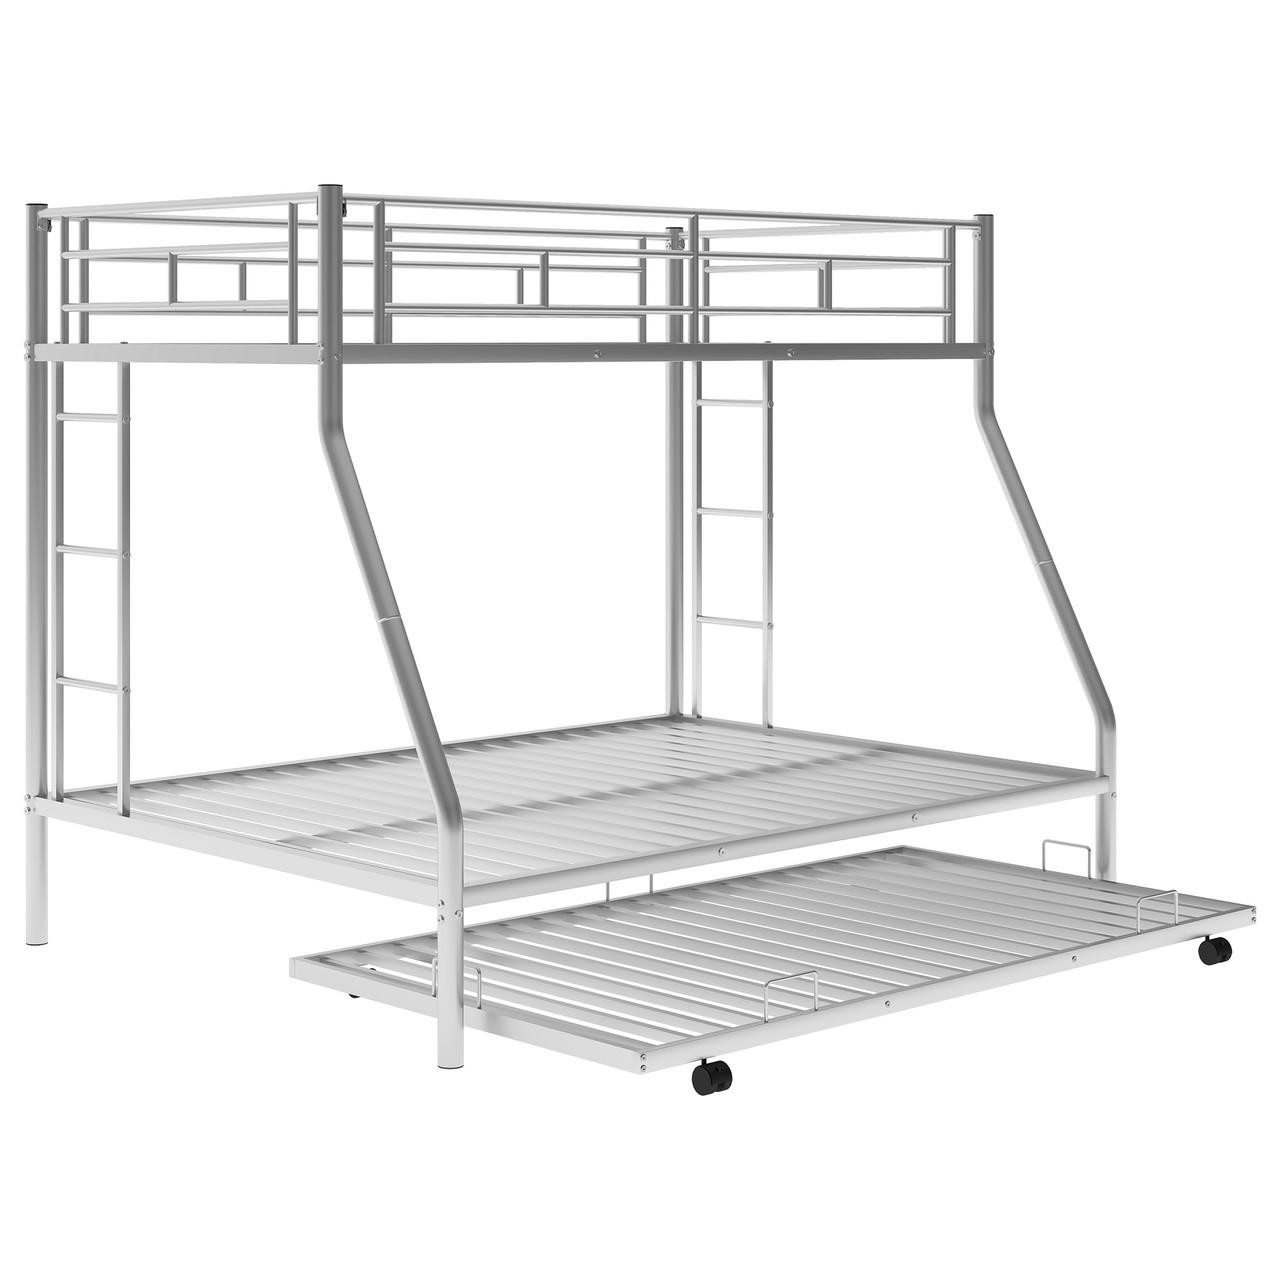 Chicken Pieces Twin over Full Bed with Trundle - Sturdy Steel Frame and Two-Side Ladders 